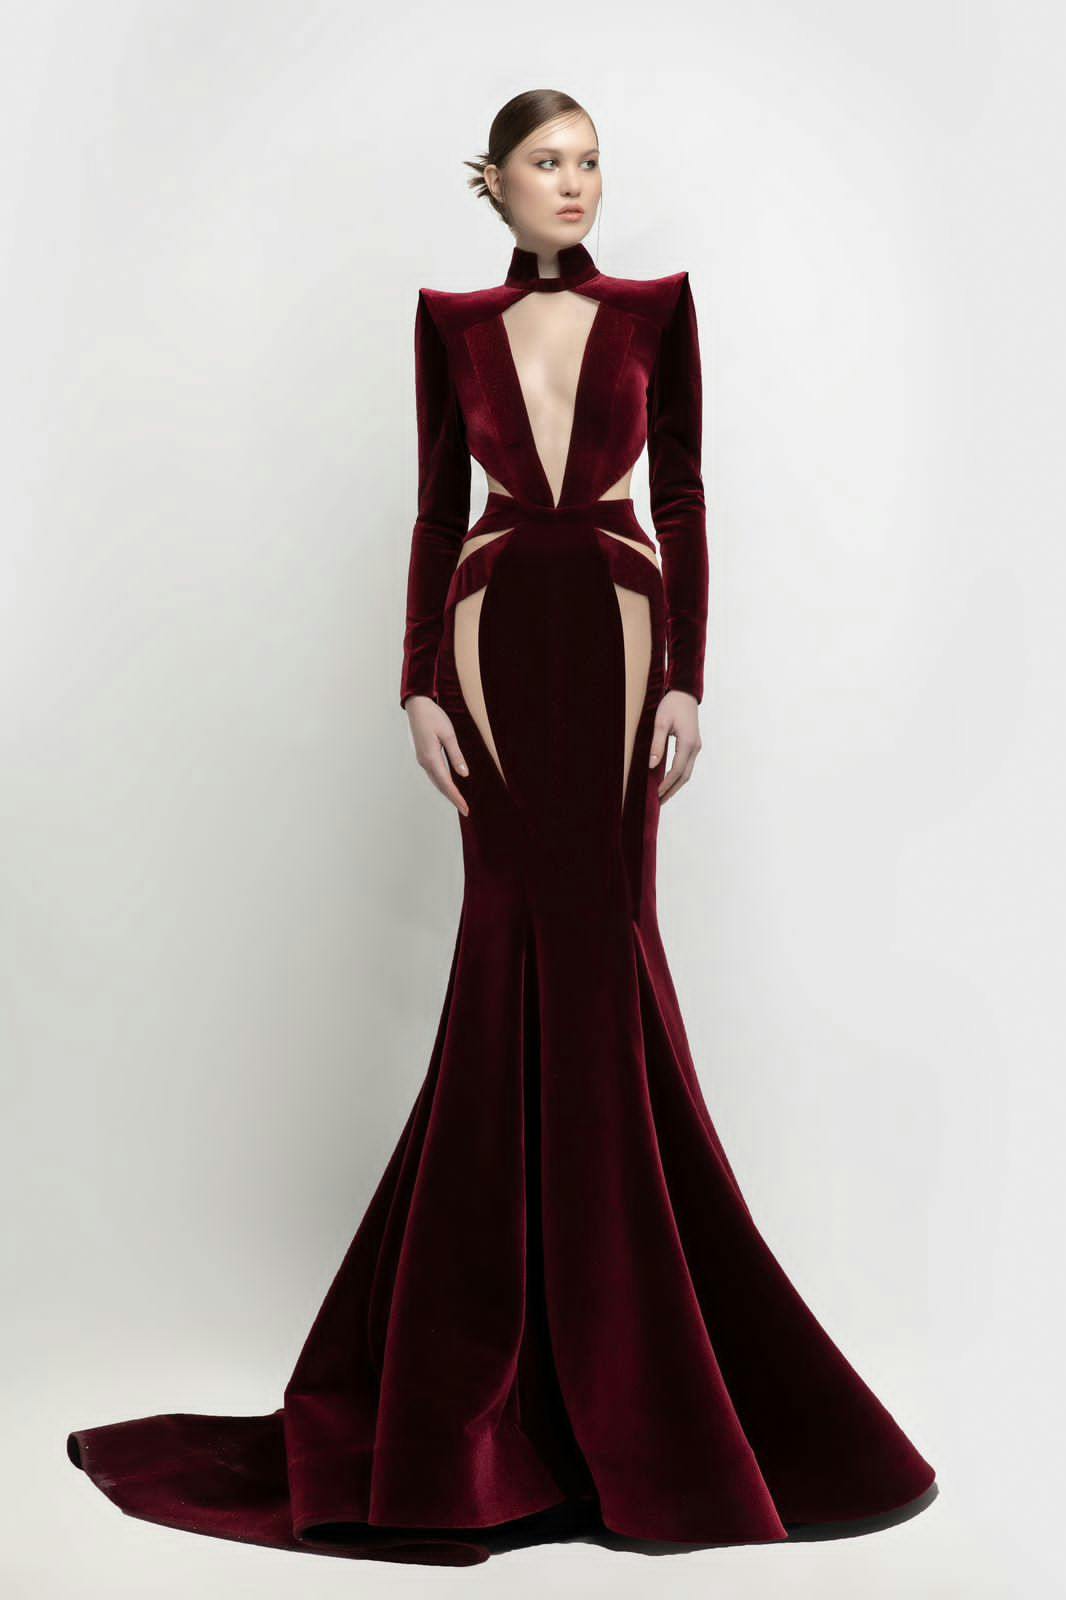 Look 27 - Jean fares couture - JFC- sexy bordeau velvet dress with deep V-neck